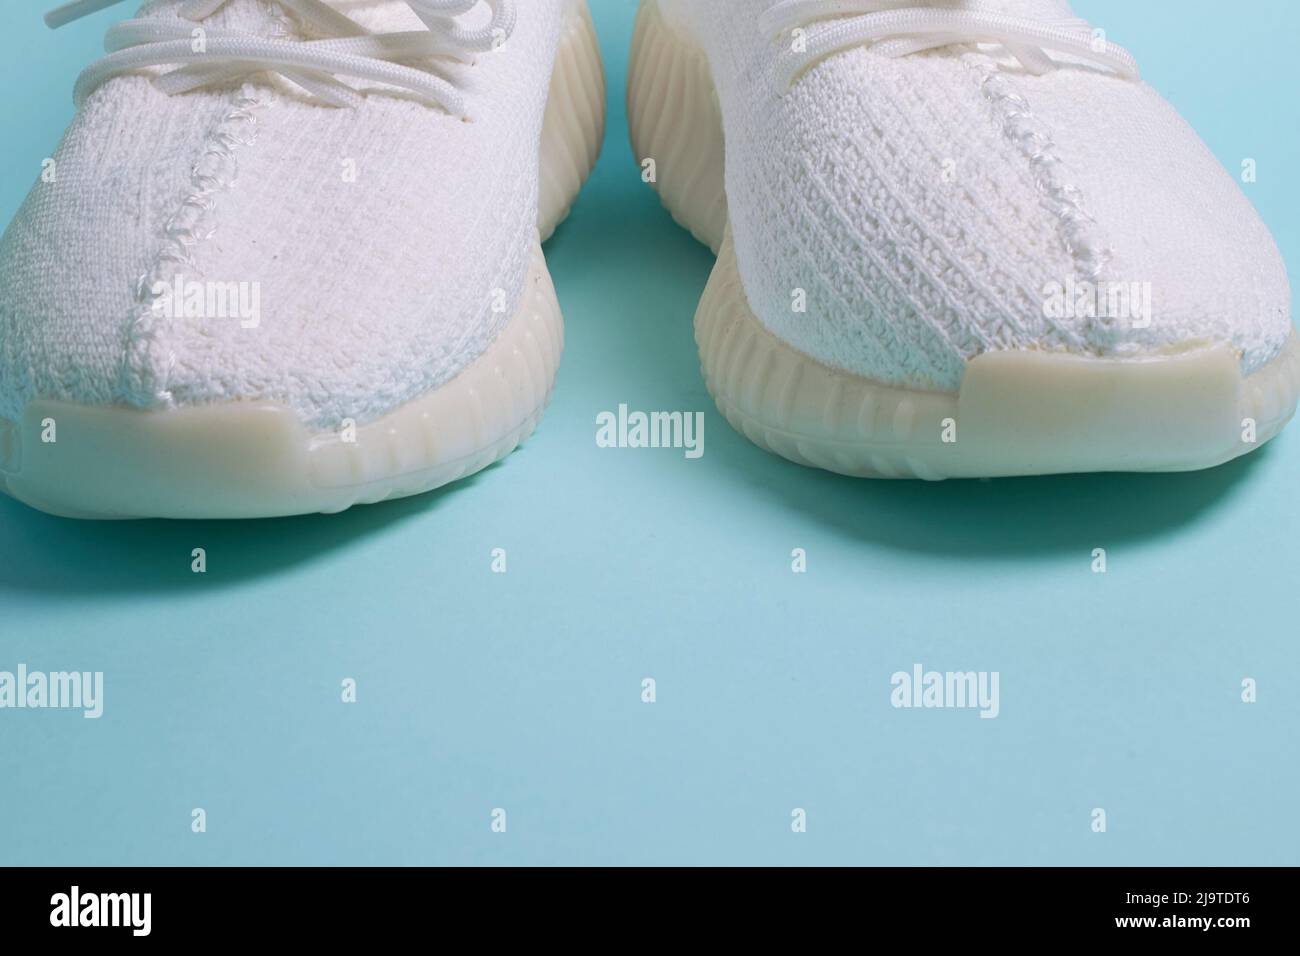 A pair of white sneakers on a blue background Stock Photo